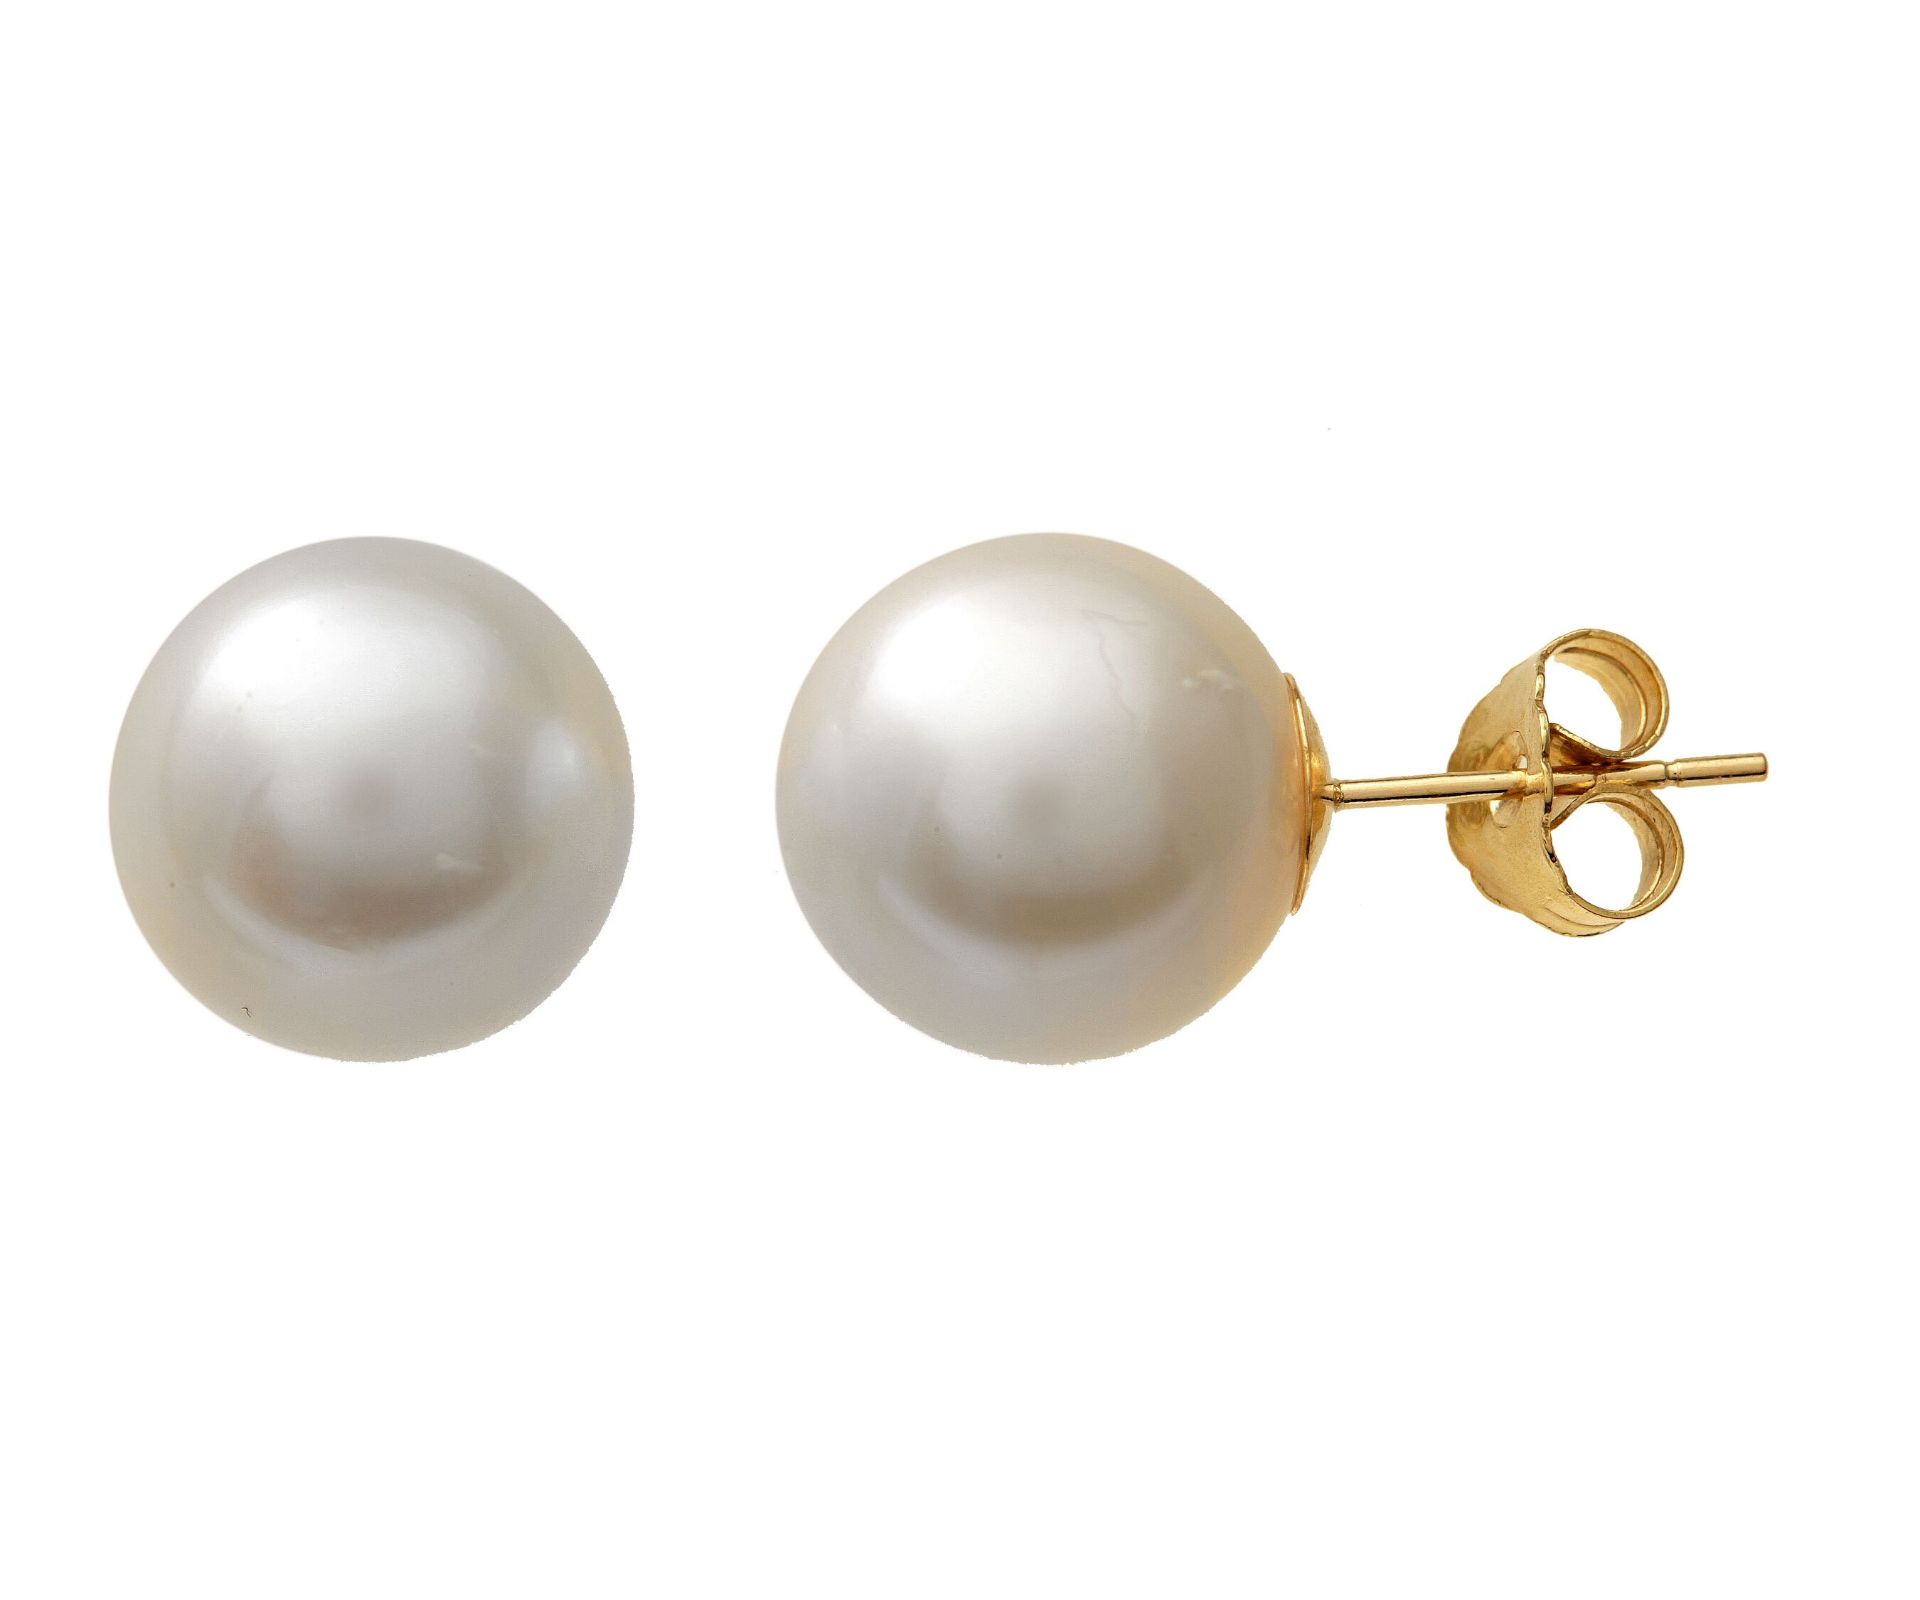 6MM pearl studs in 9ct yellow gold - Image 2 of 2